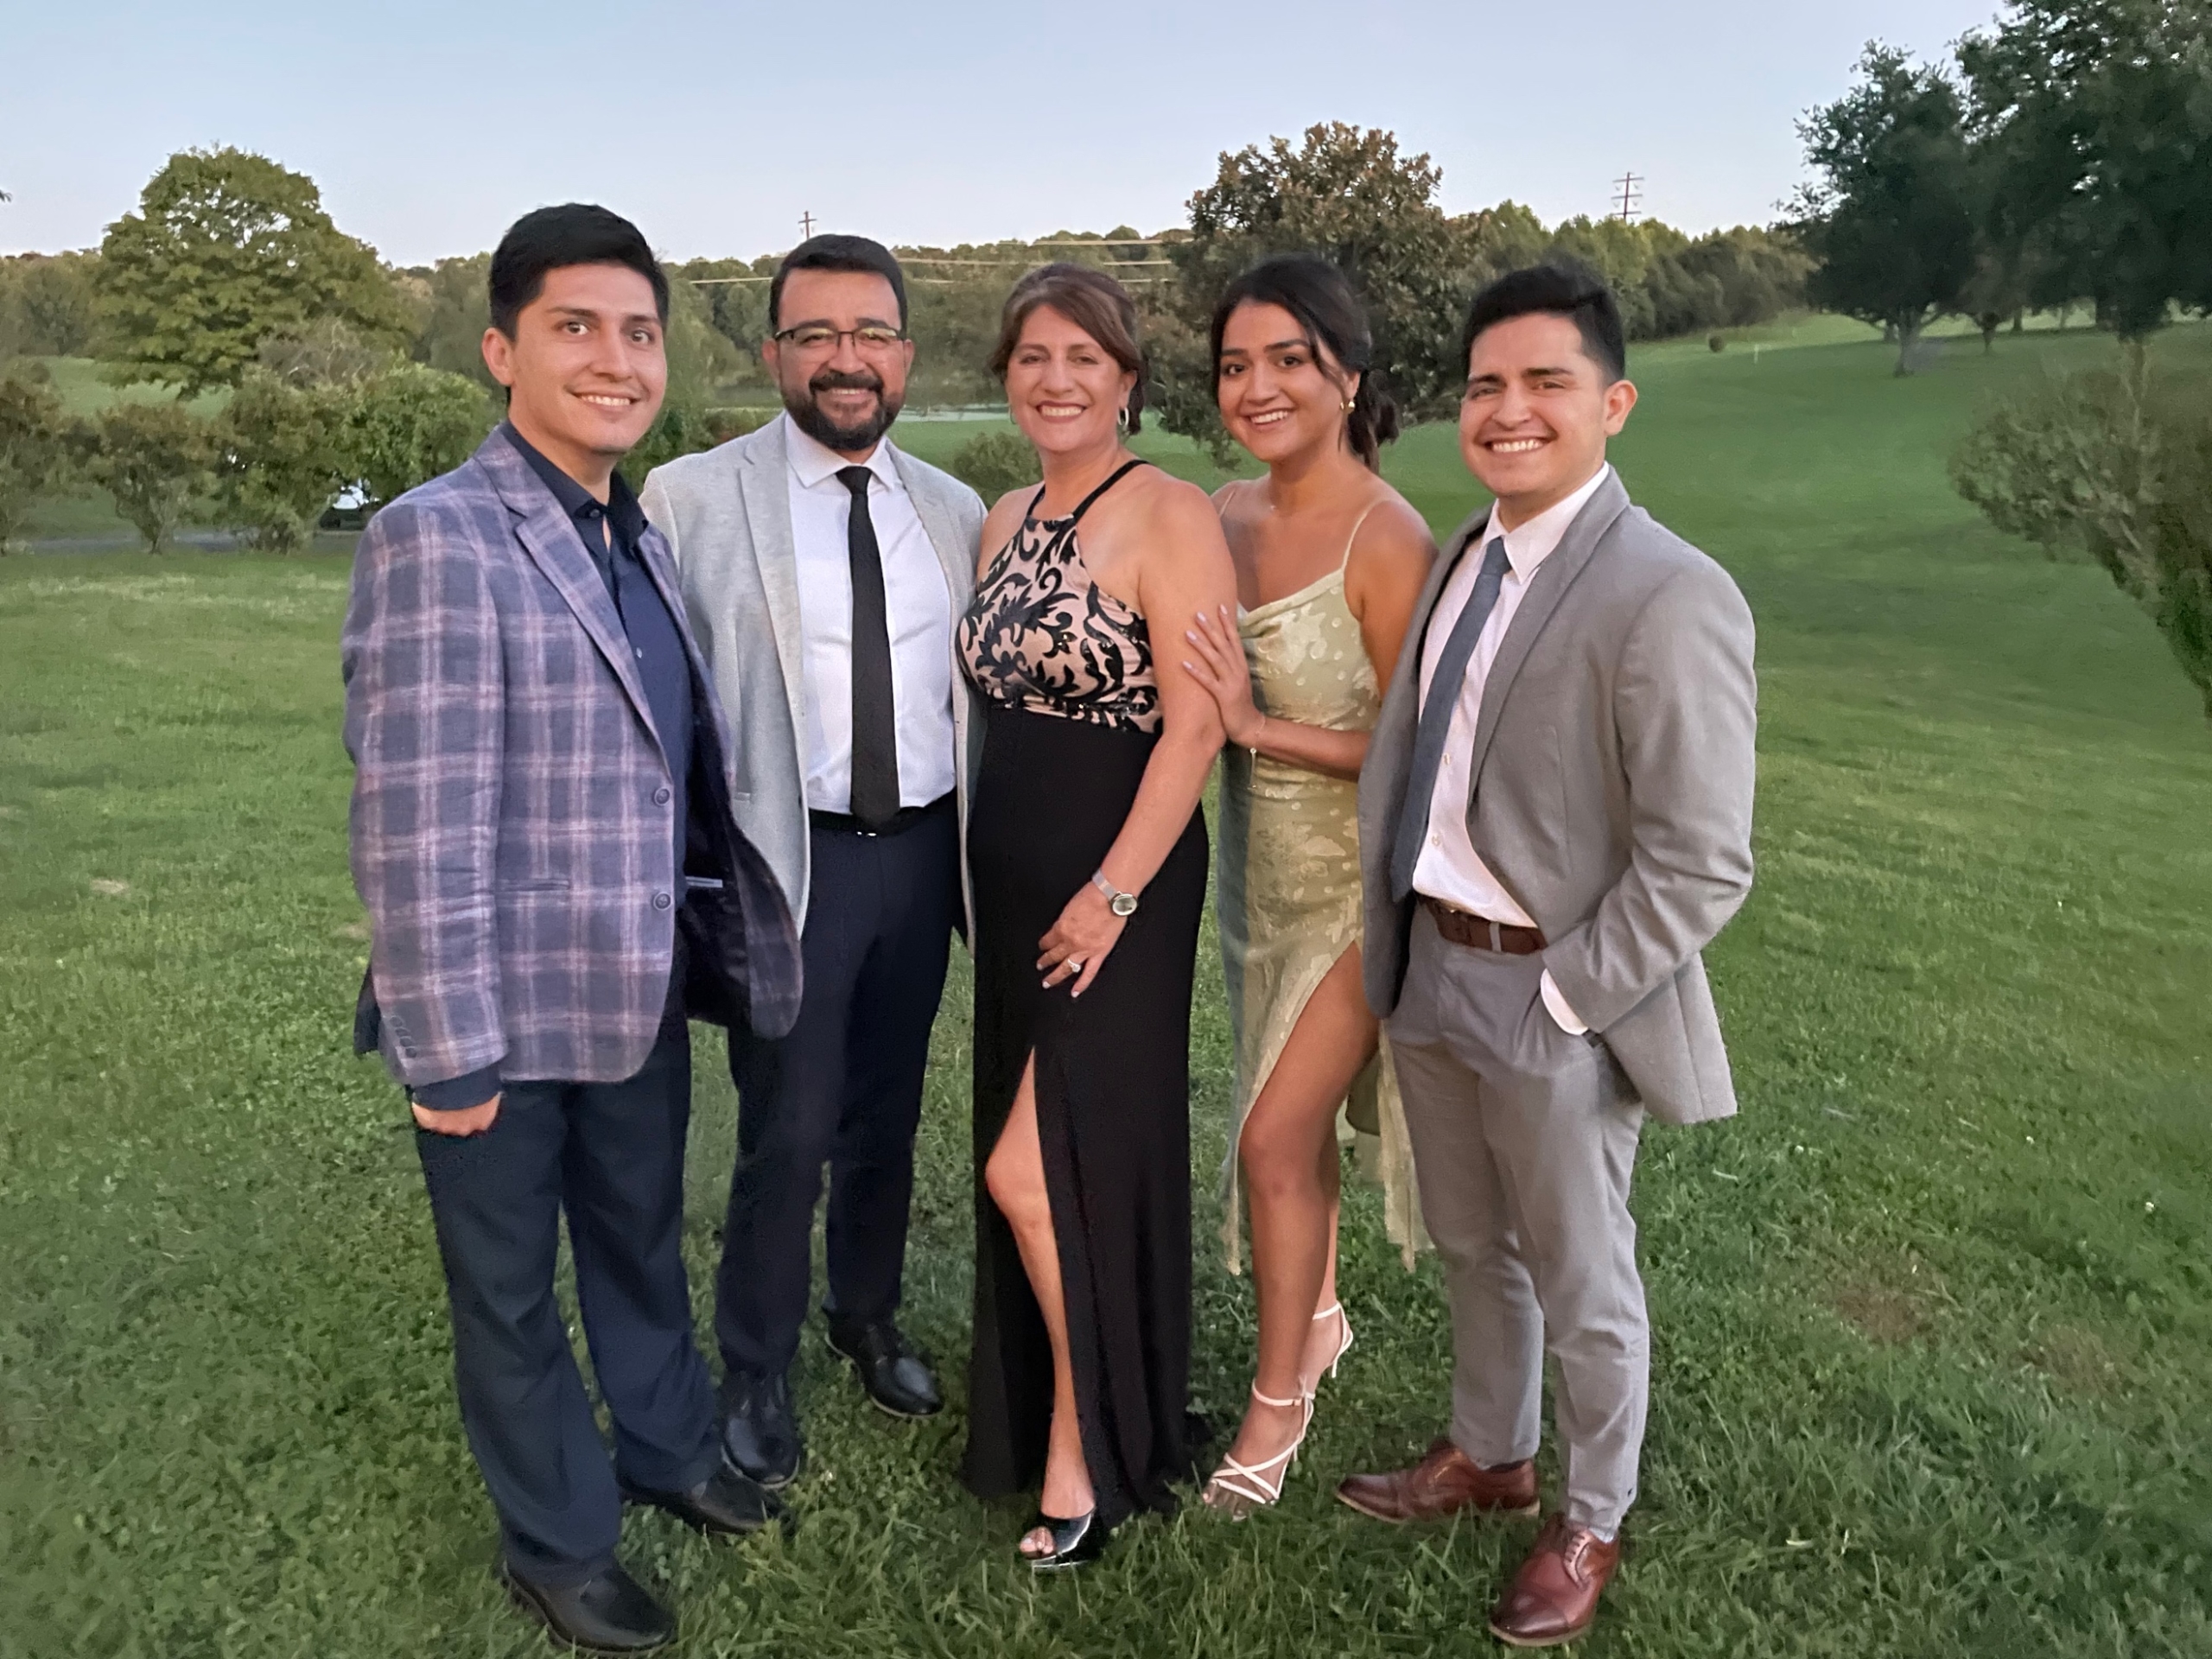 A family including a mom, dad, and three siblings stands posing together and smiling in formal wear. They are standing on a grassy field with trees in the background.